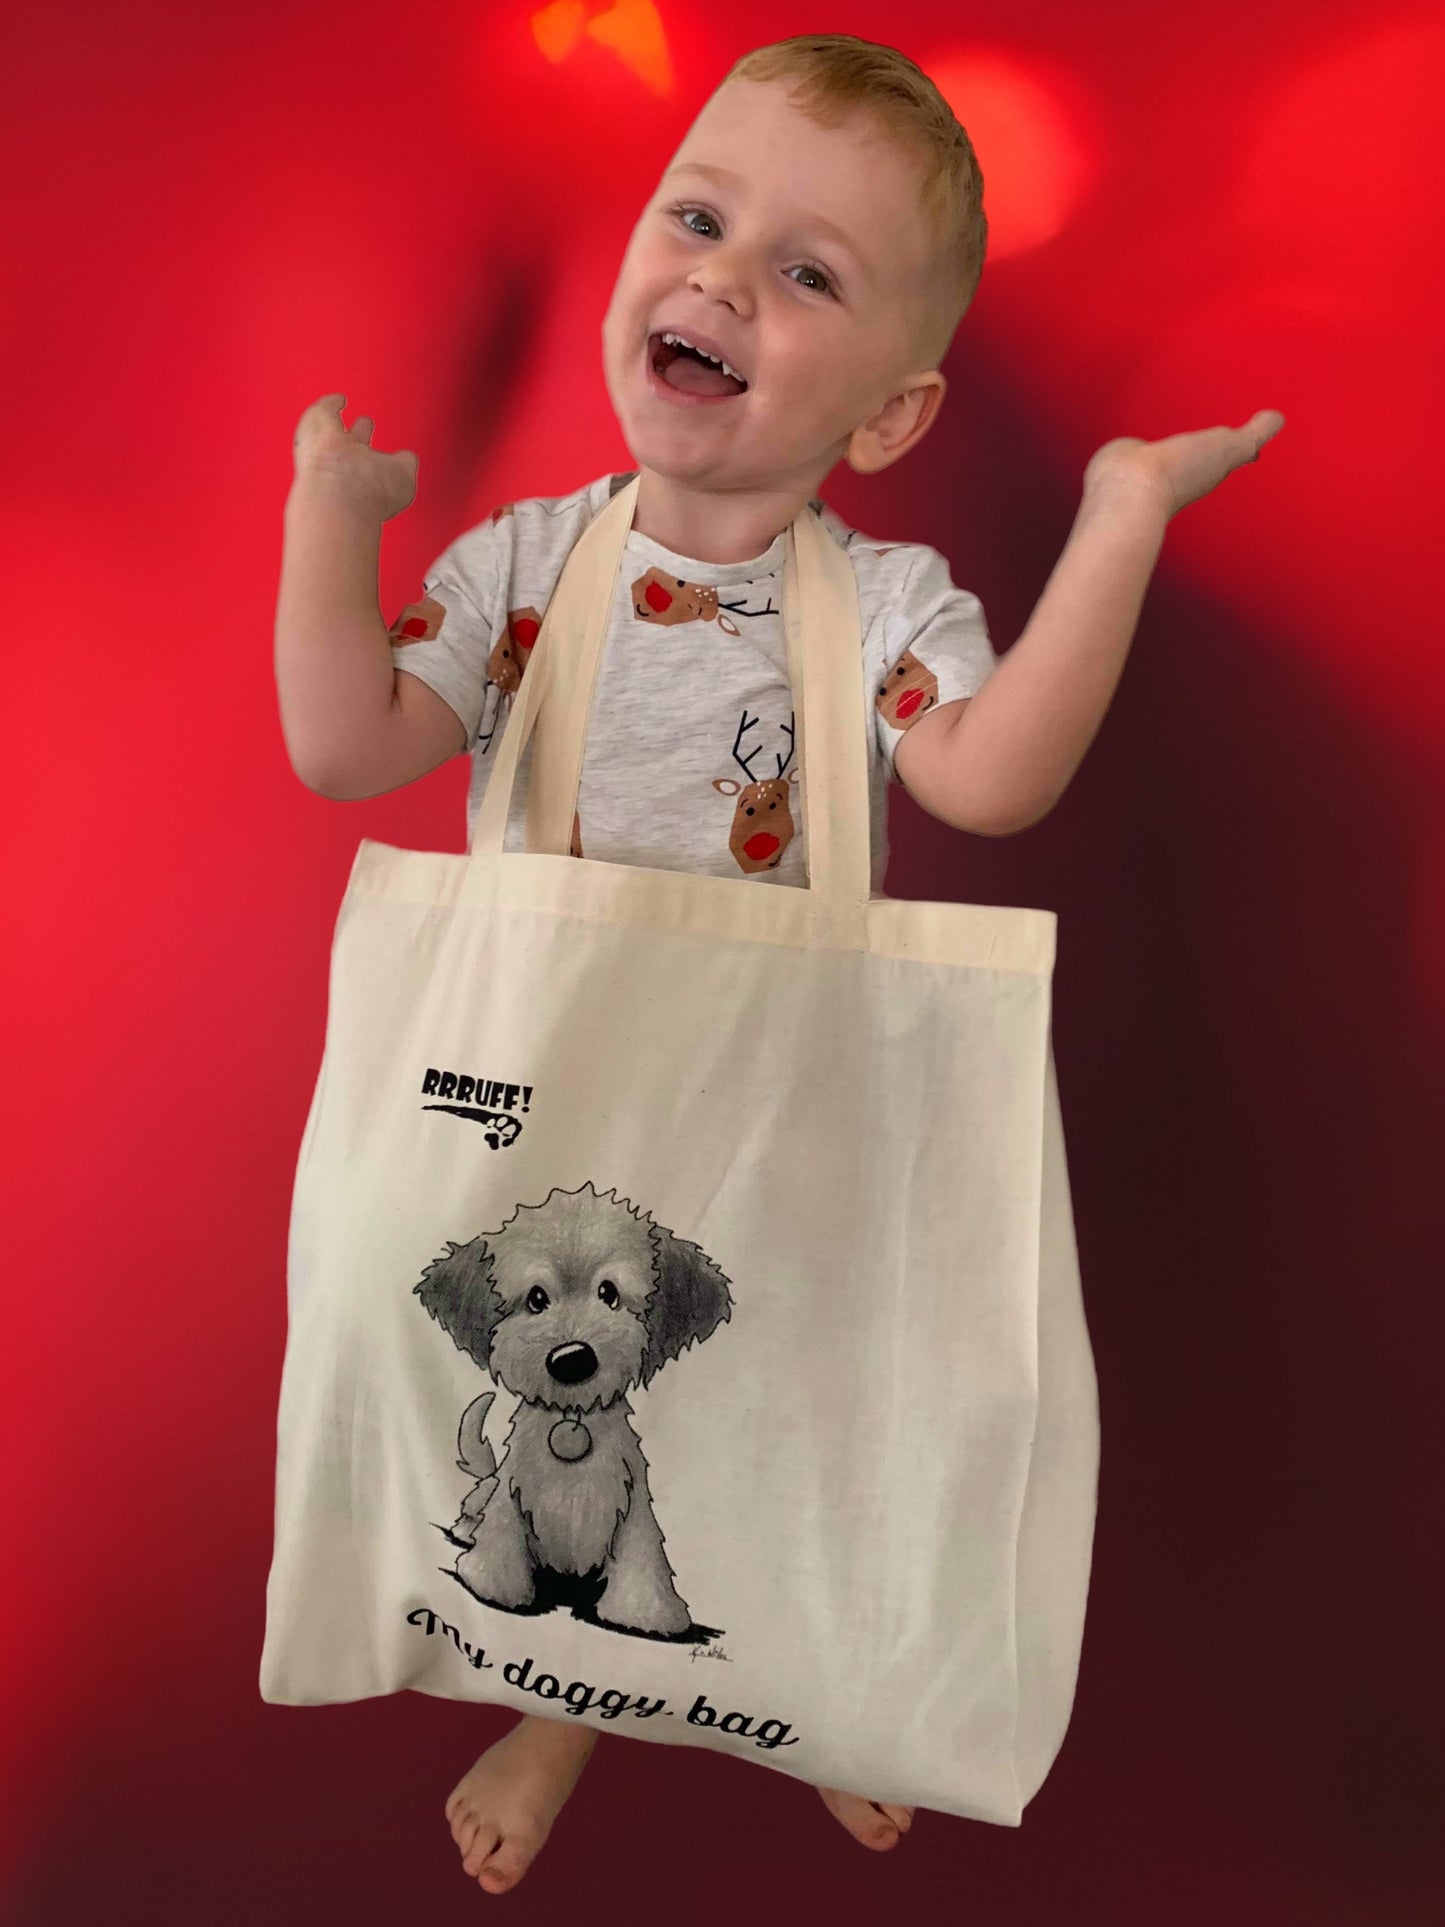 Calico tote bag book bag shopping bag oodle puppy doggy bag birthday gift